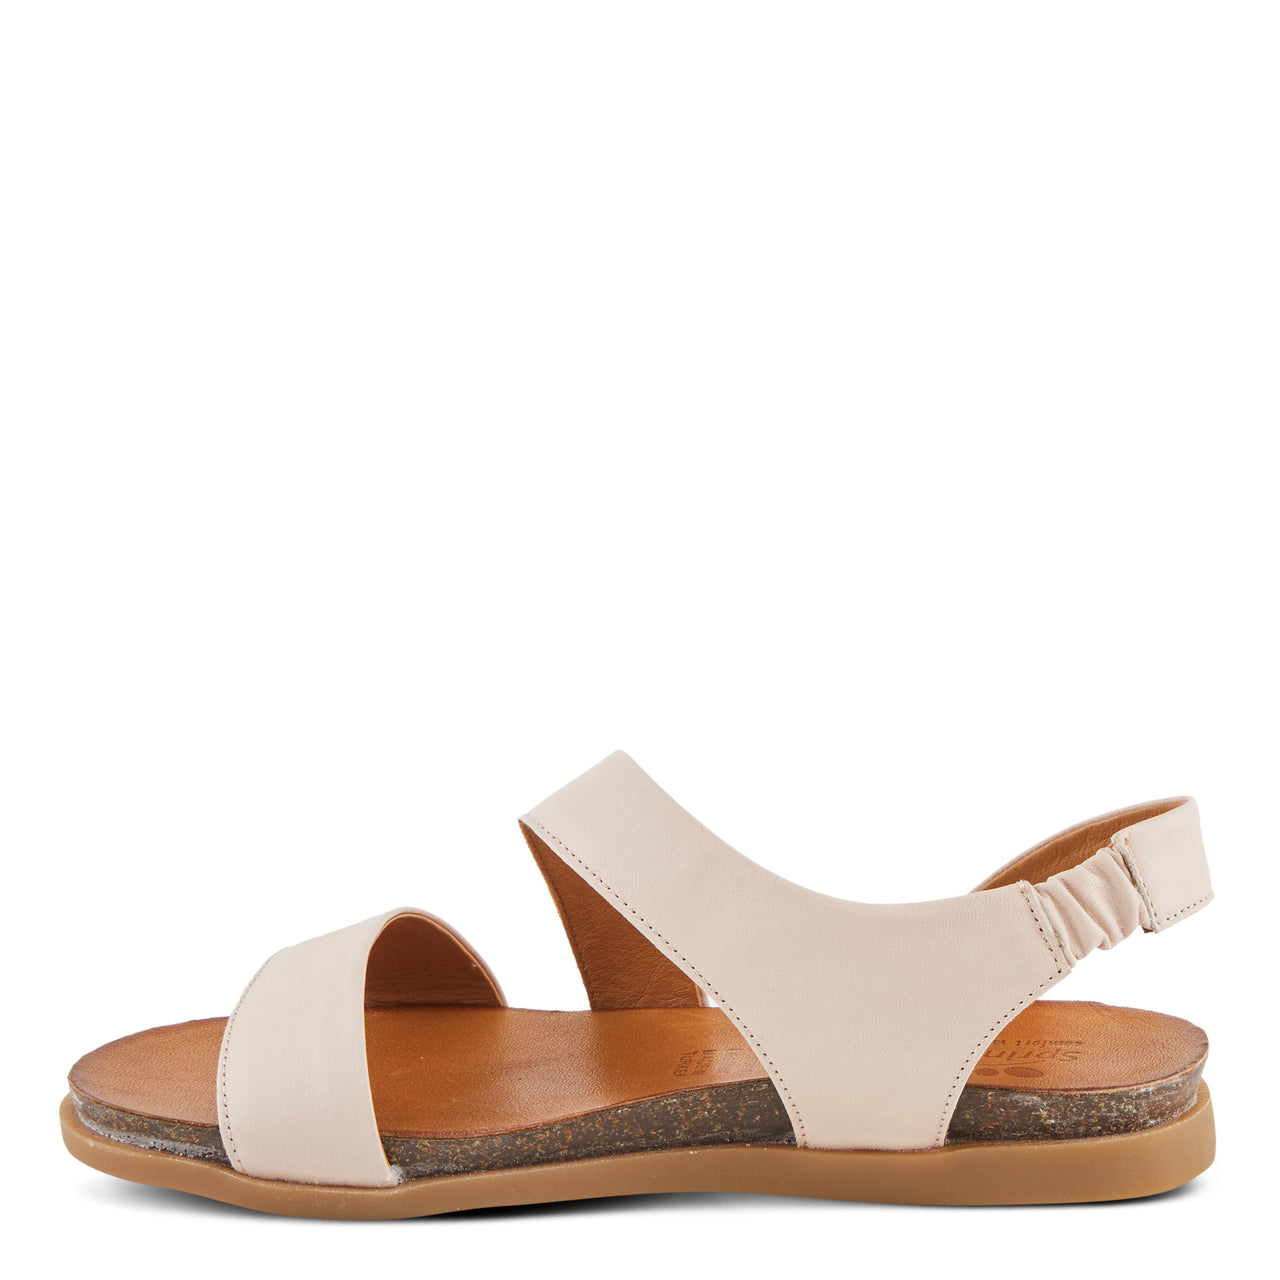 Spring Step Besitos Sandals in brown leather, featuring an adjustable ankle strap and cushioned footbed for all-day comfort and style